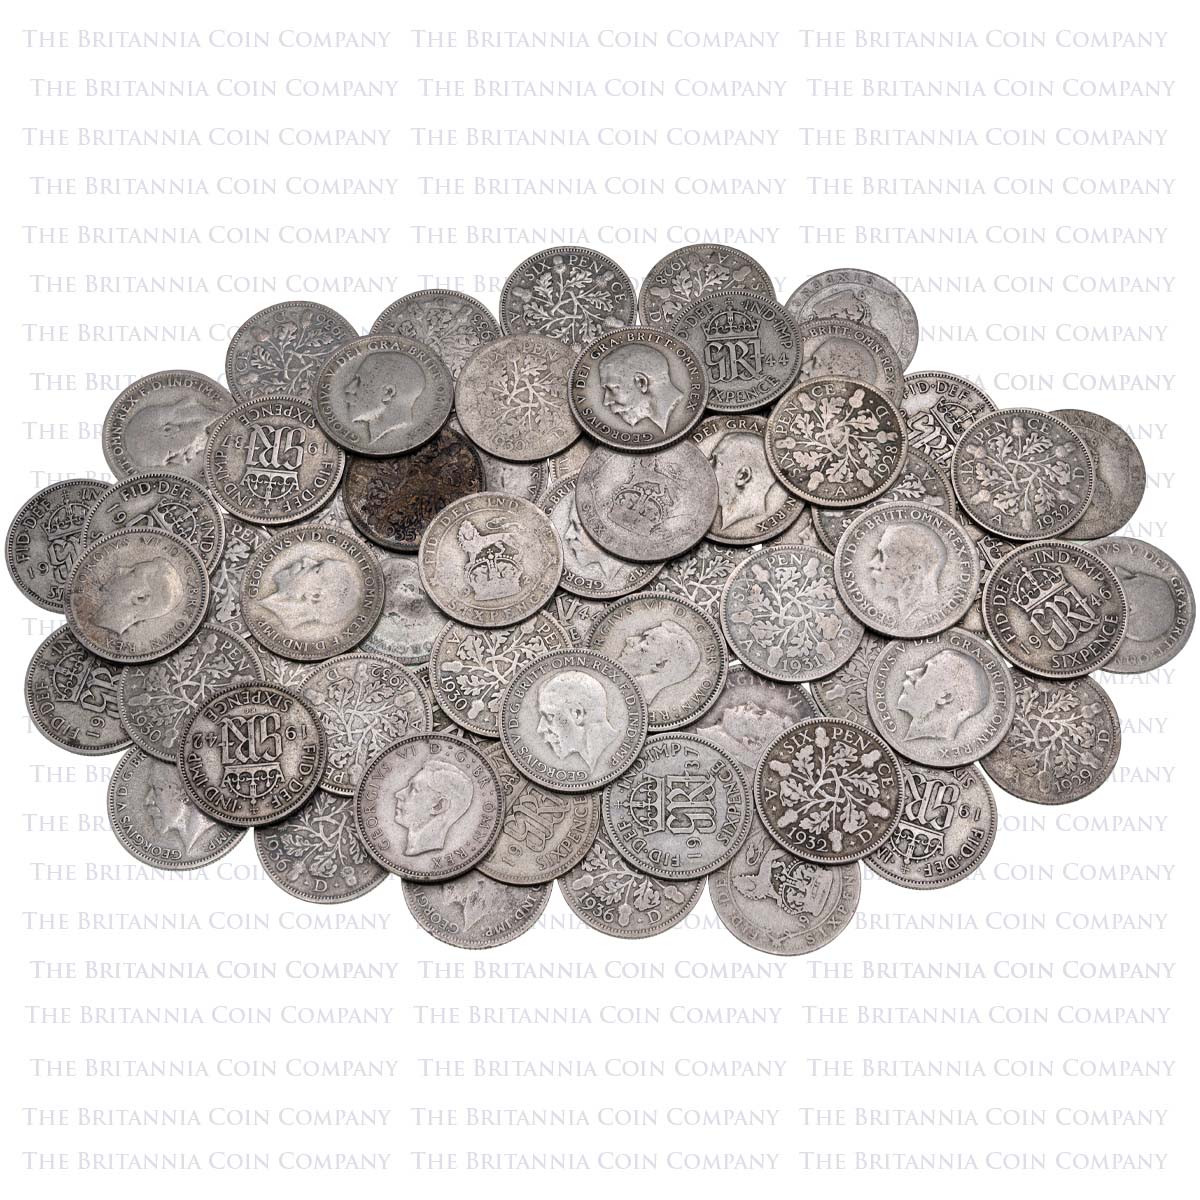 Bulk 1kg Mixed Date Unsorted 1920-1947 50% Silver Bullion Sixpence Coins Kiloware (Best Value)